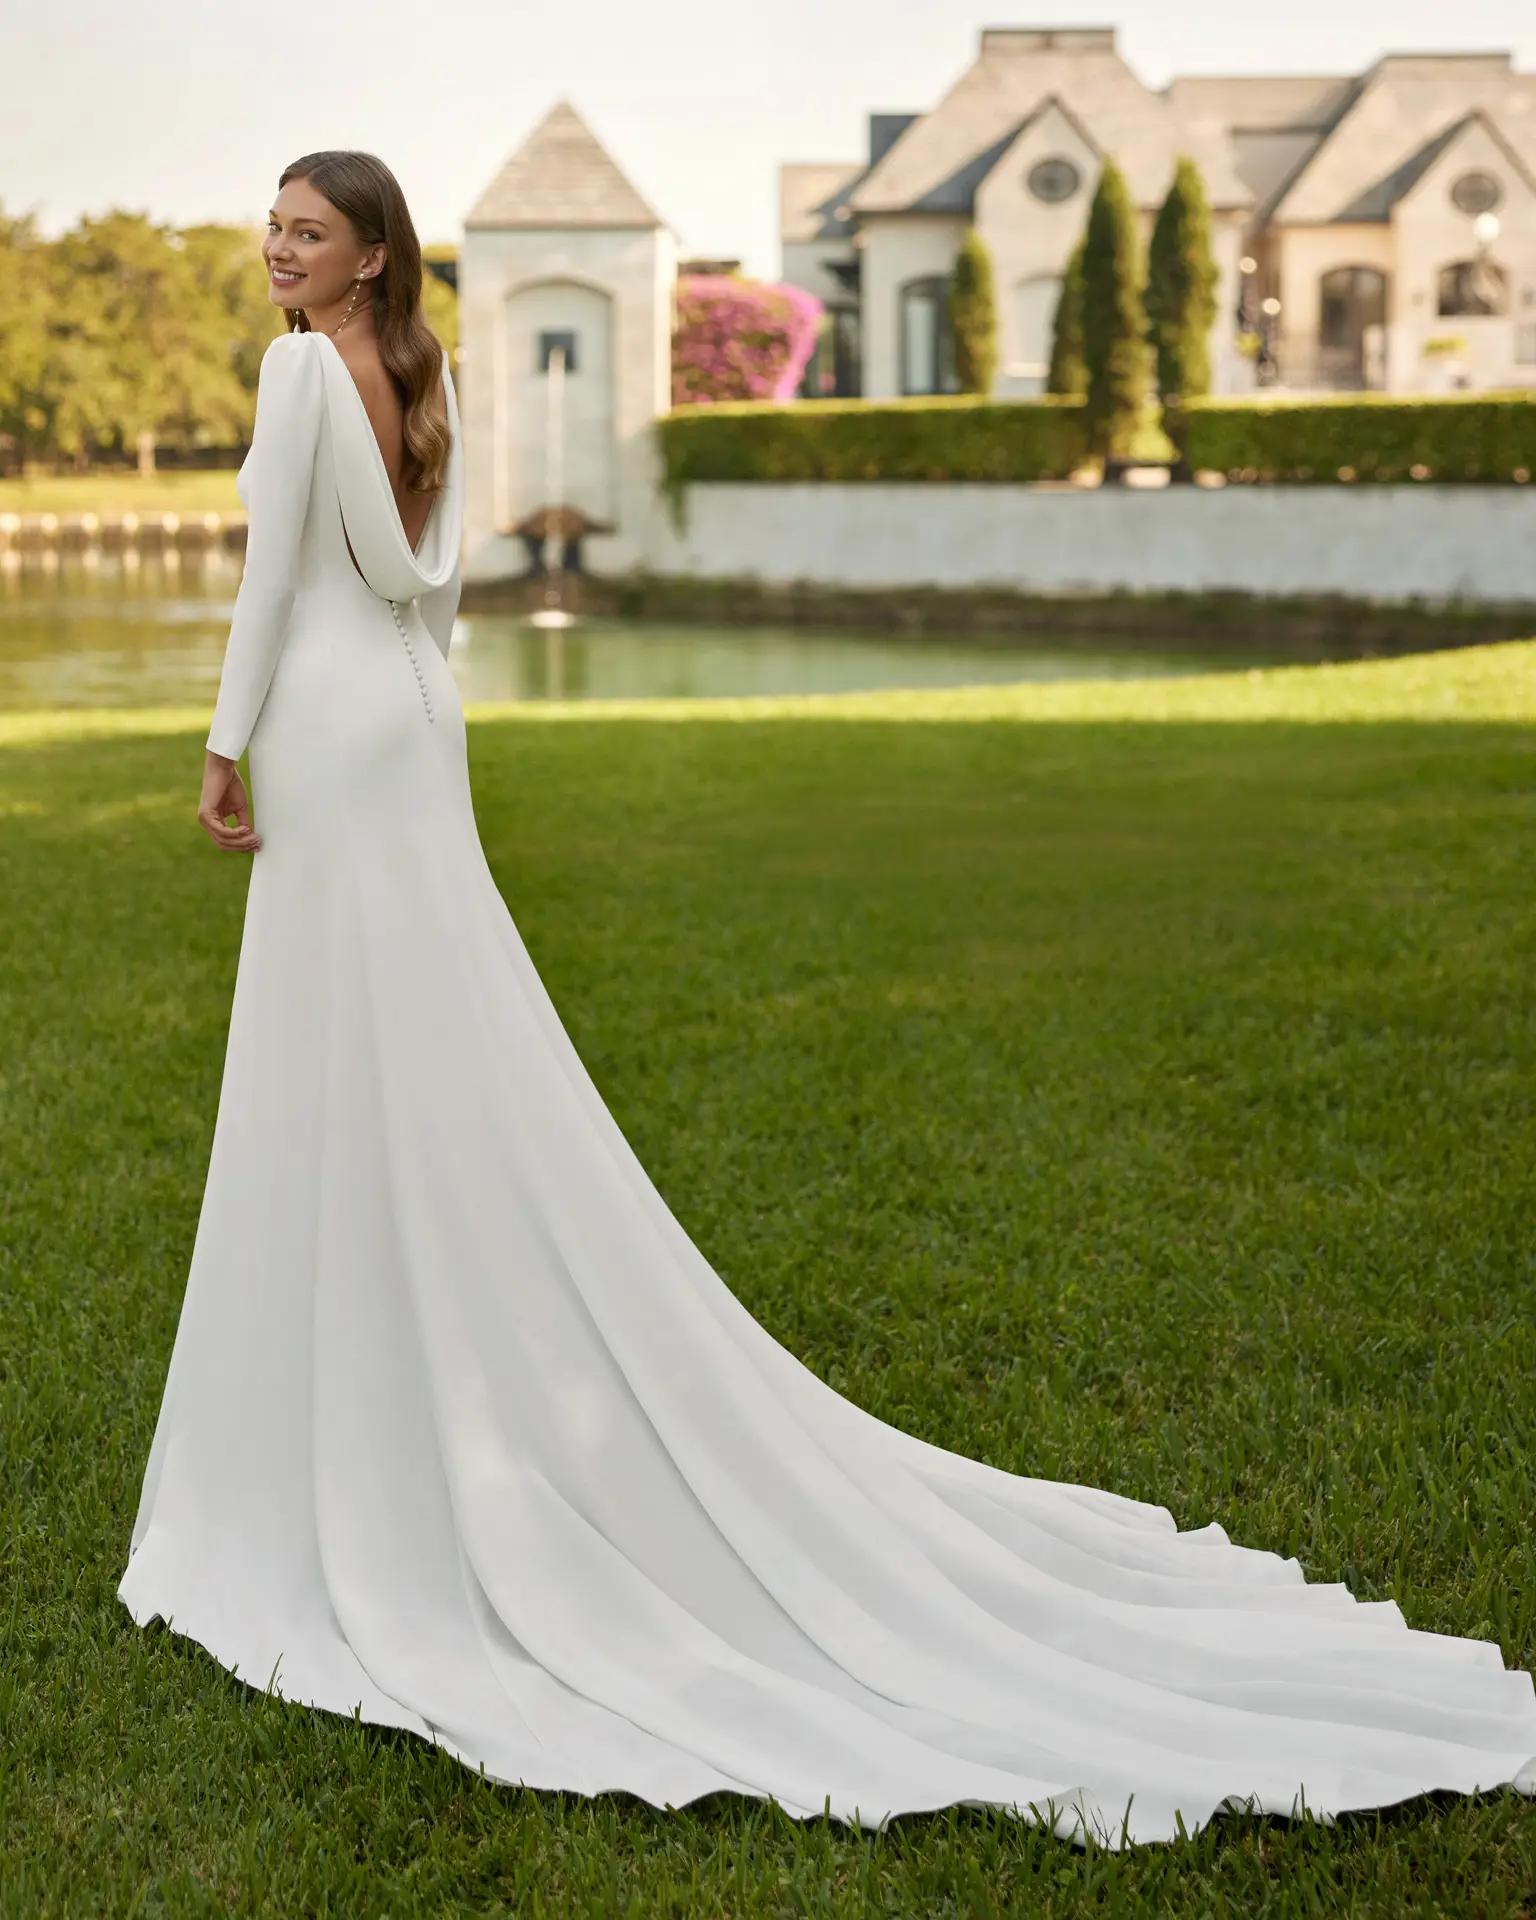 Edana crepe wedding dress by Rosa Clara with long sleeves cathedral train and cowl back boat high neckline